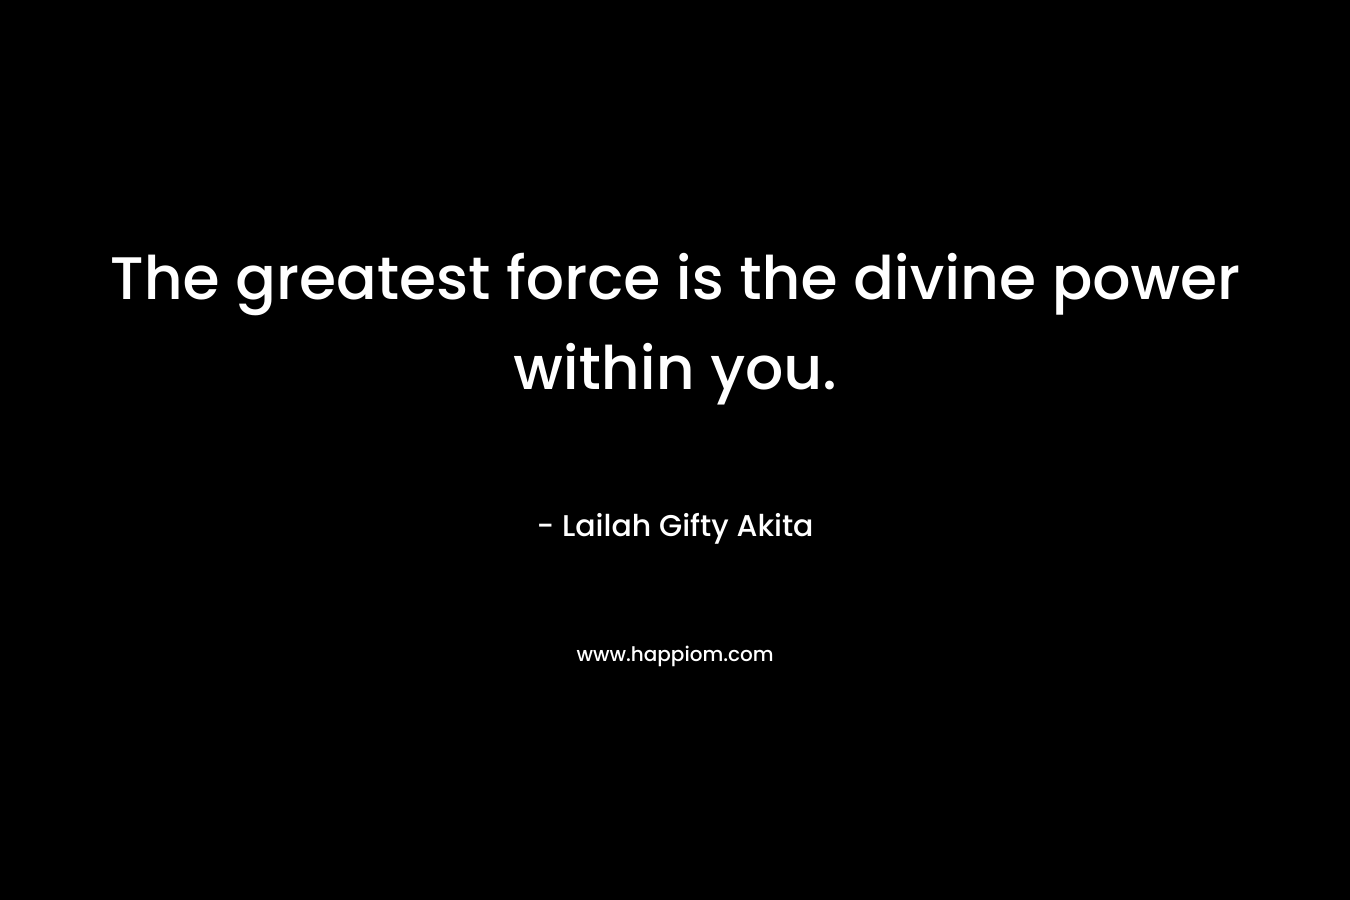 The greatest force is the divine power within you.